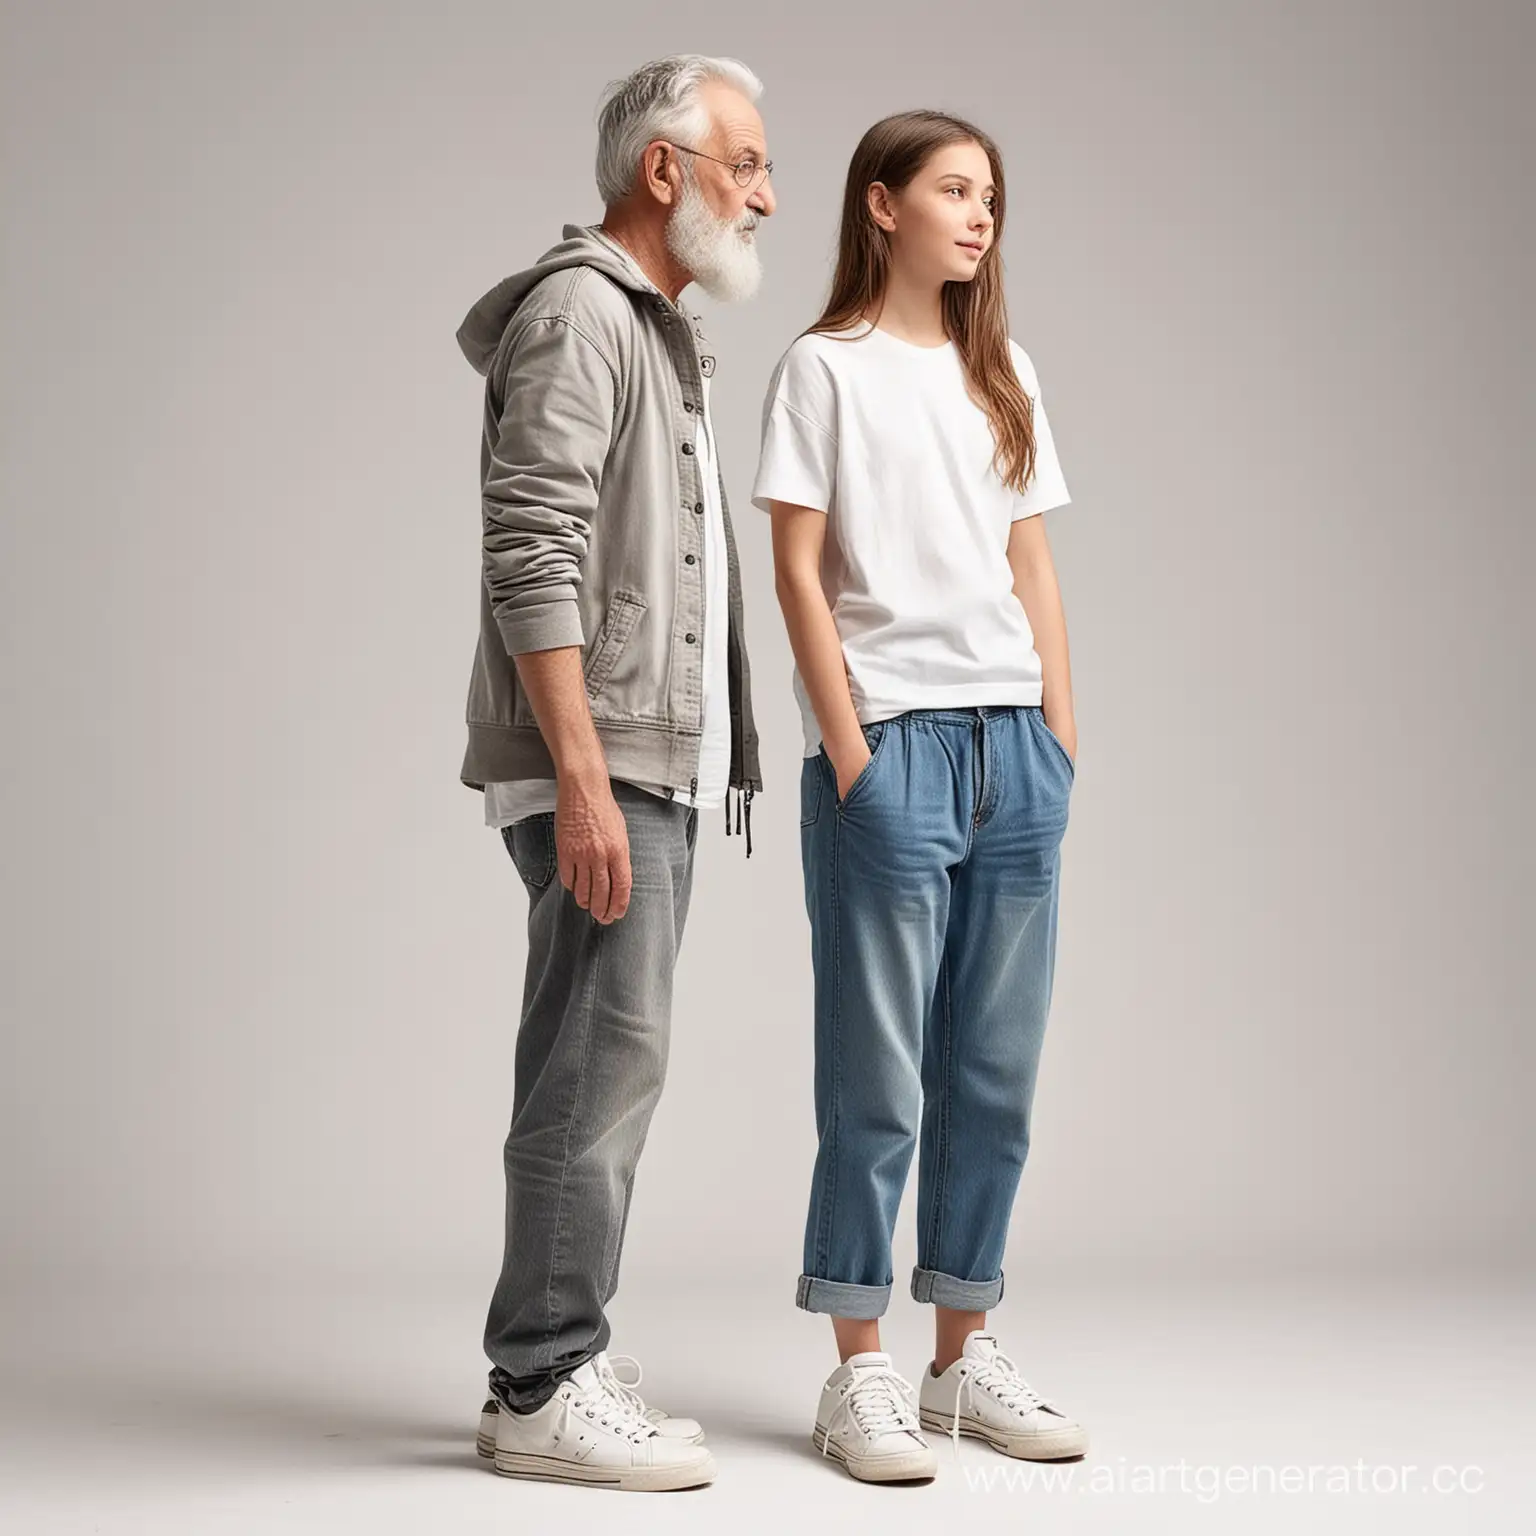 side view photo "miniature sized old man" very short little old man stands back to back with extremely tall teen model in sneakers, white studio 